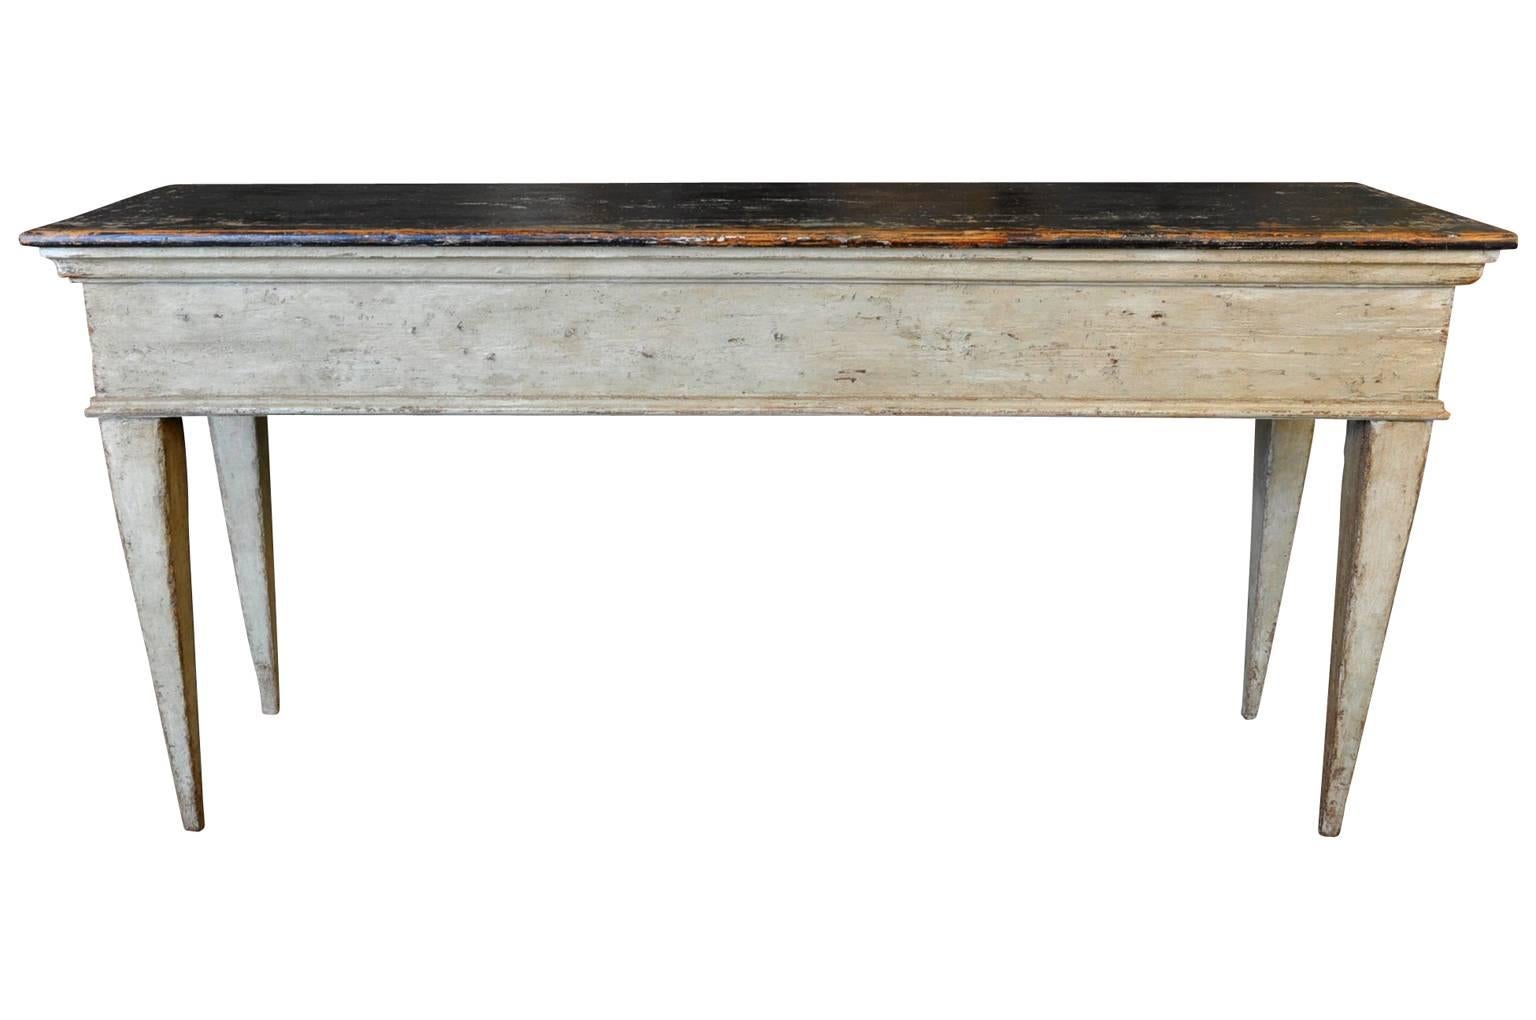 A very striking painted console from Spain. This console is beautifully constructed from 19th century elements and has a wonderful painted finish - terrific patina and texture - in hues a soft sage with an almost black top surface. An excellent